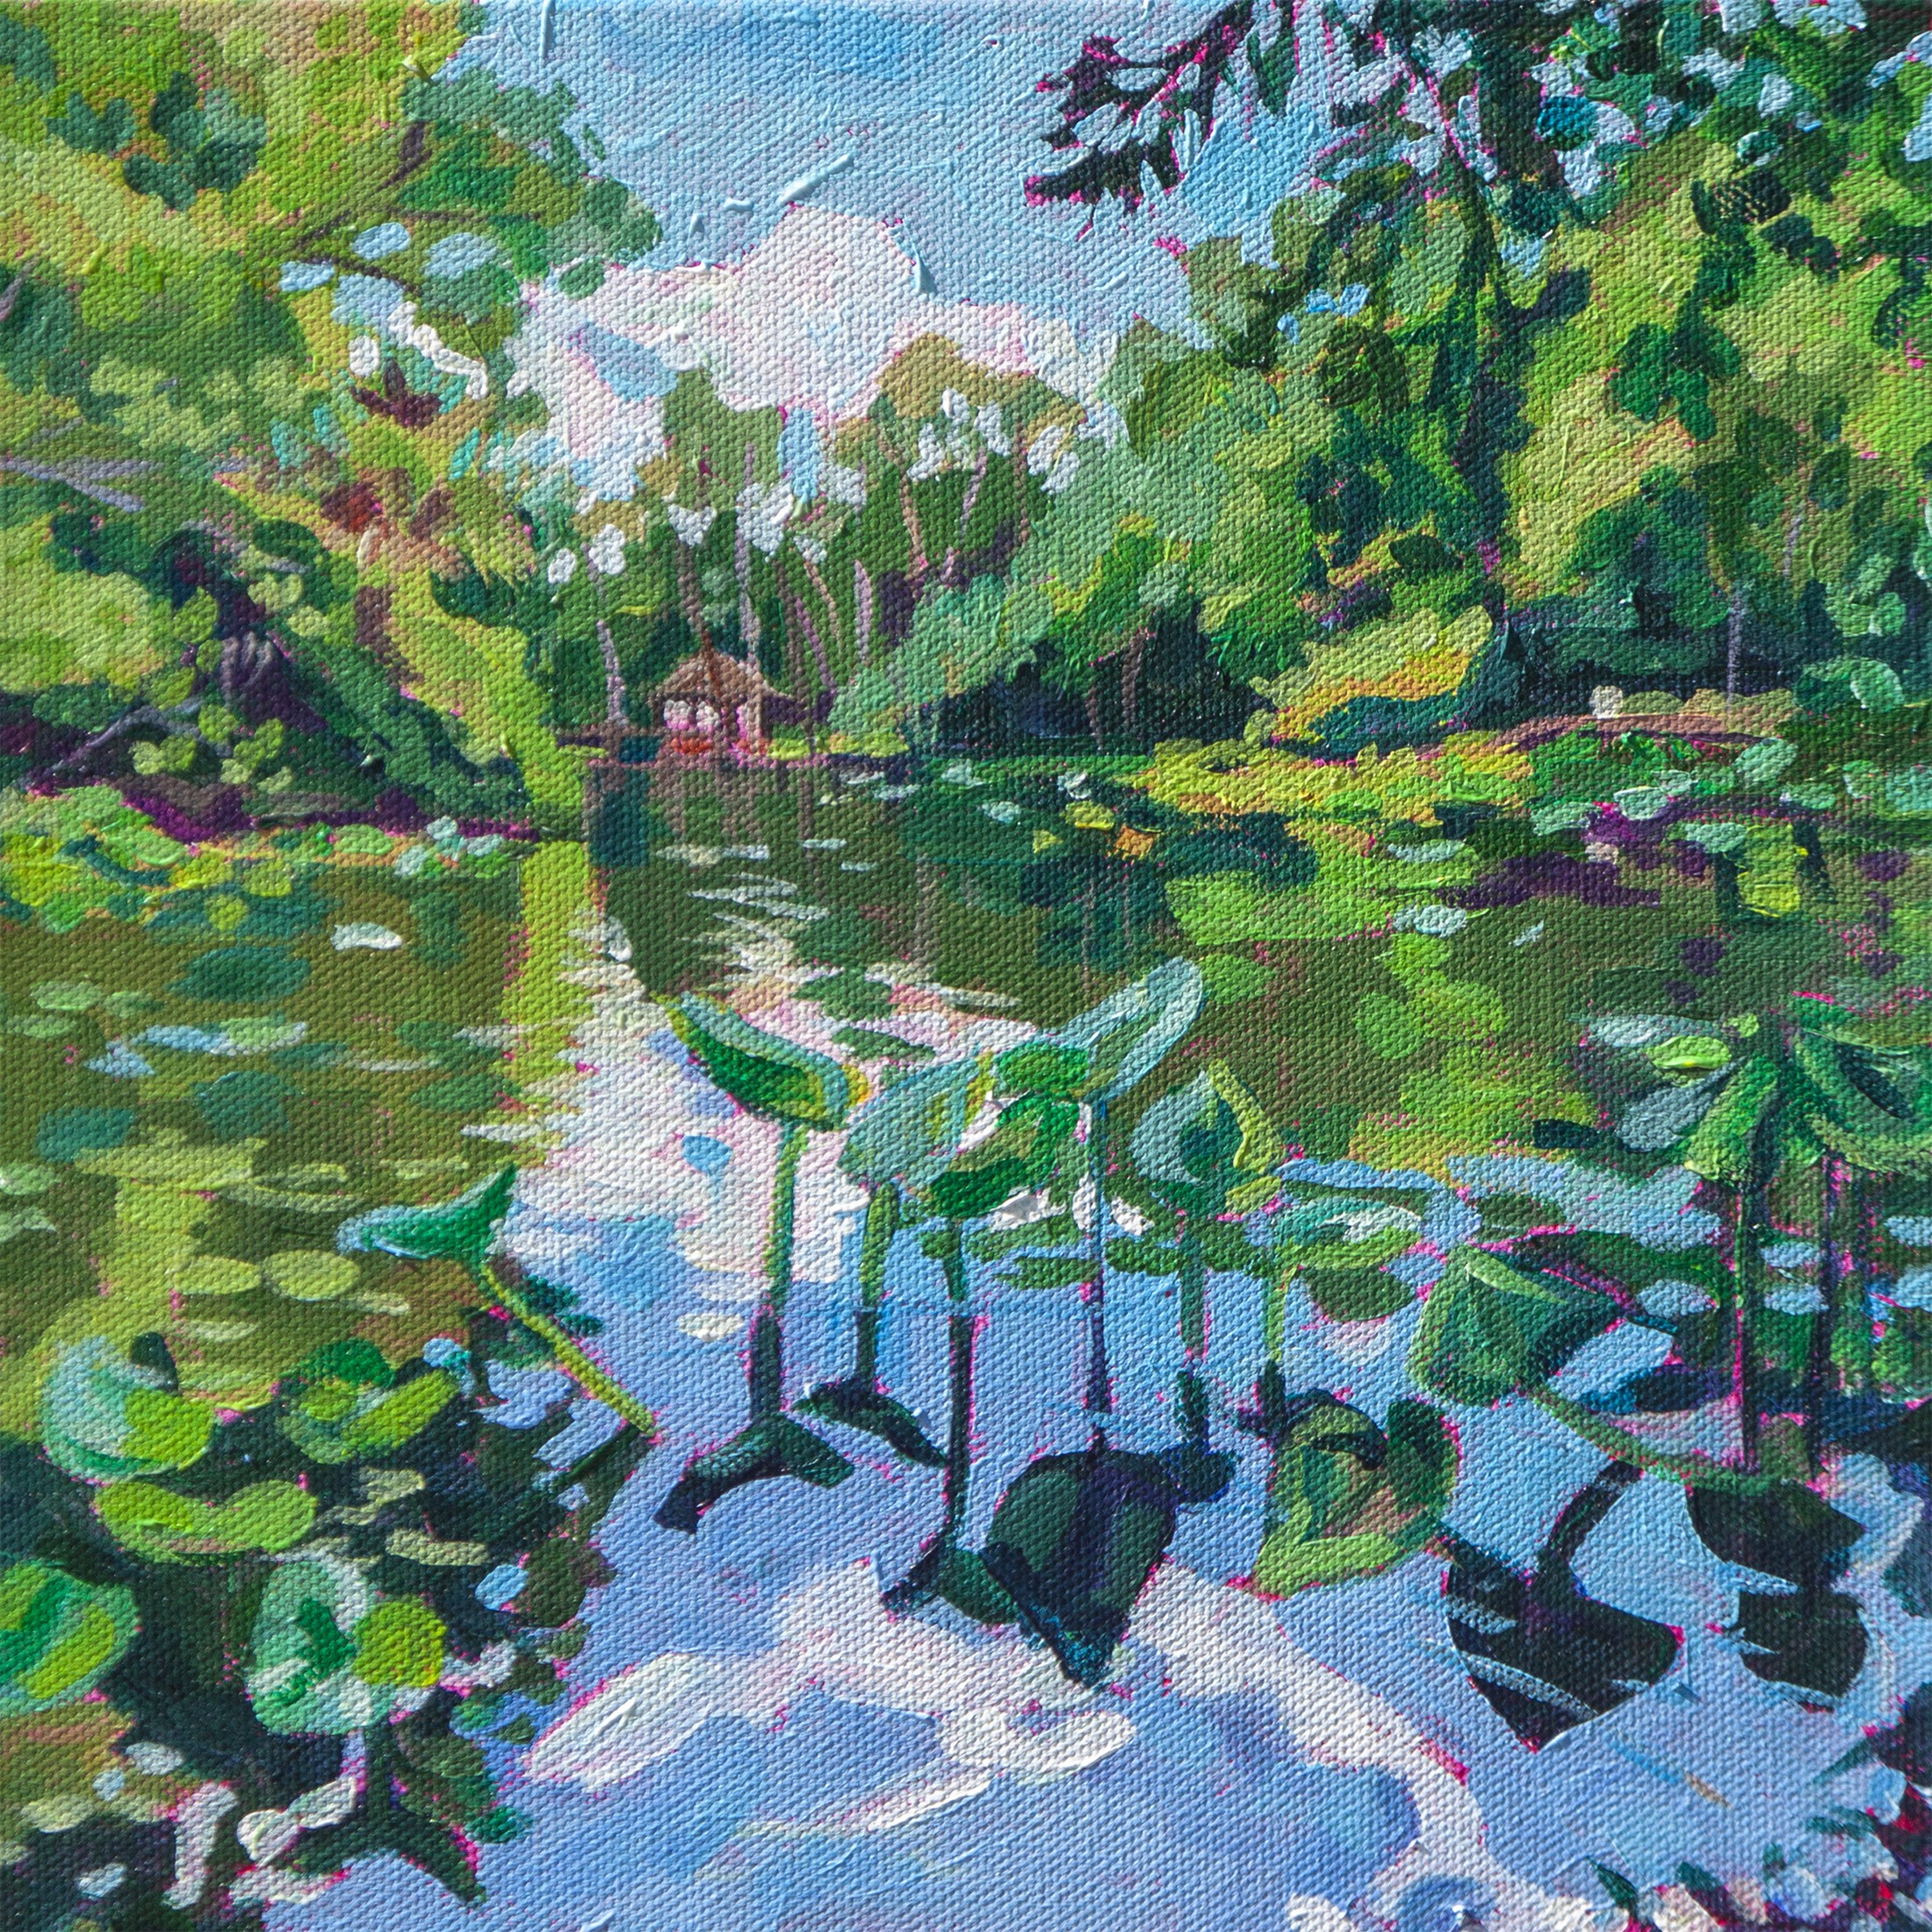 River with lily pads and reflections surrounded by green trees at Wekiva Island in Orlando